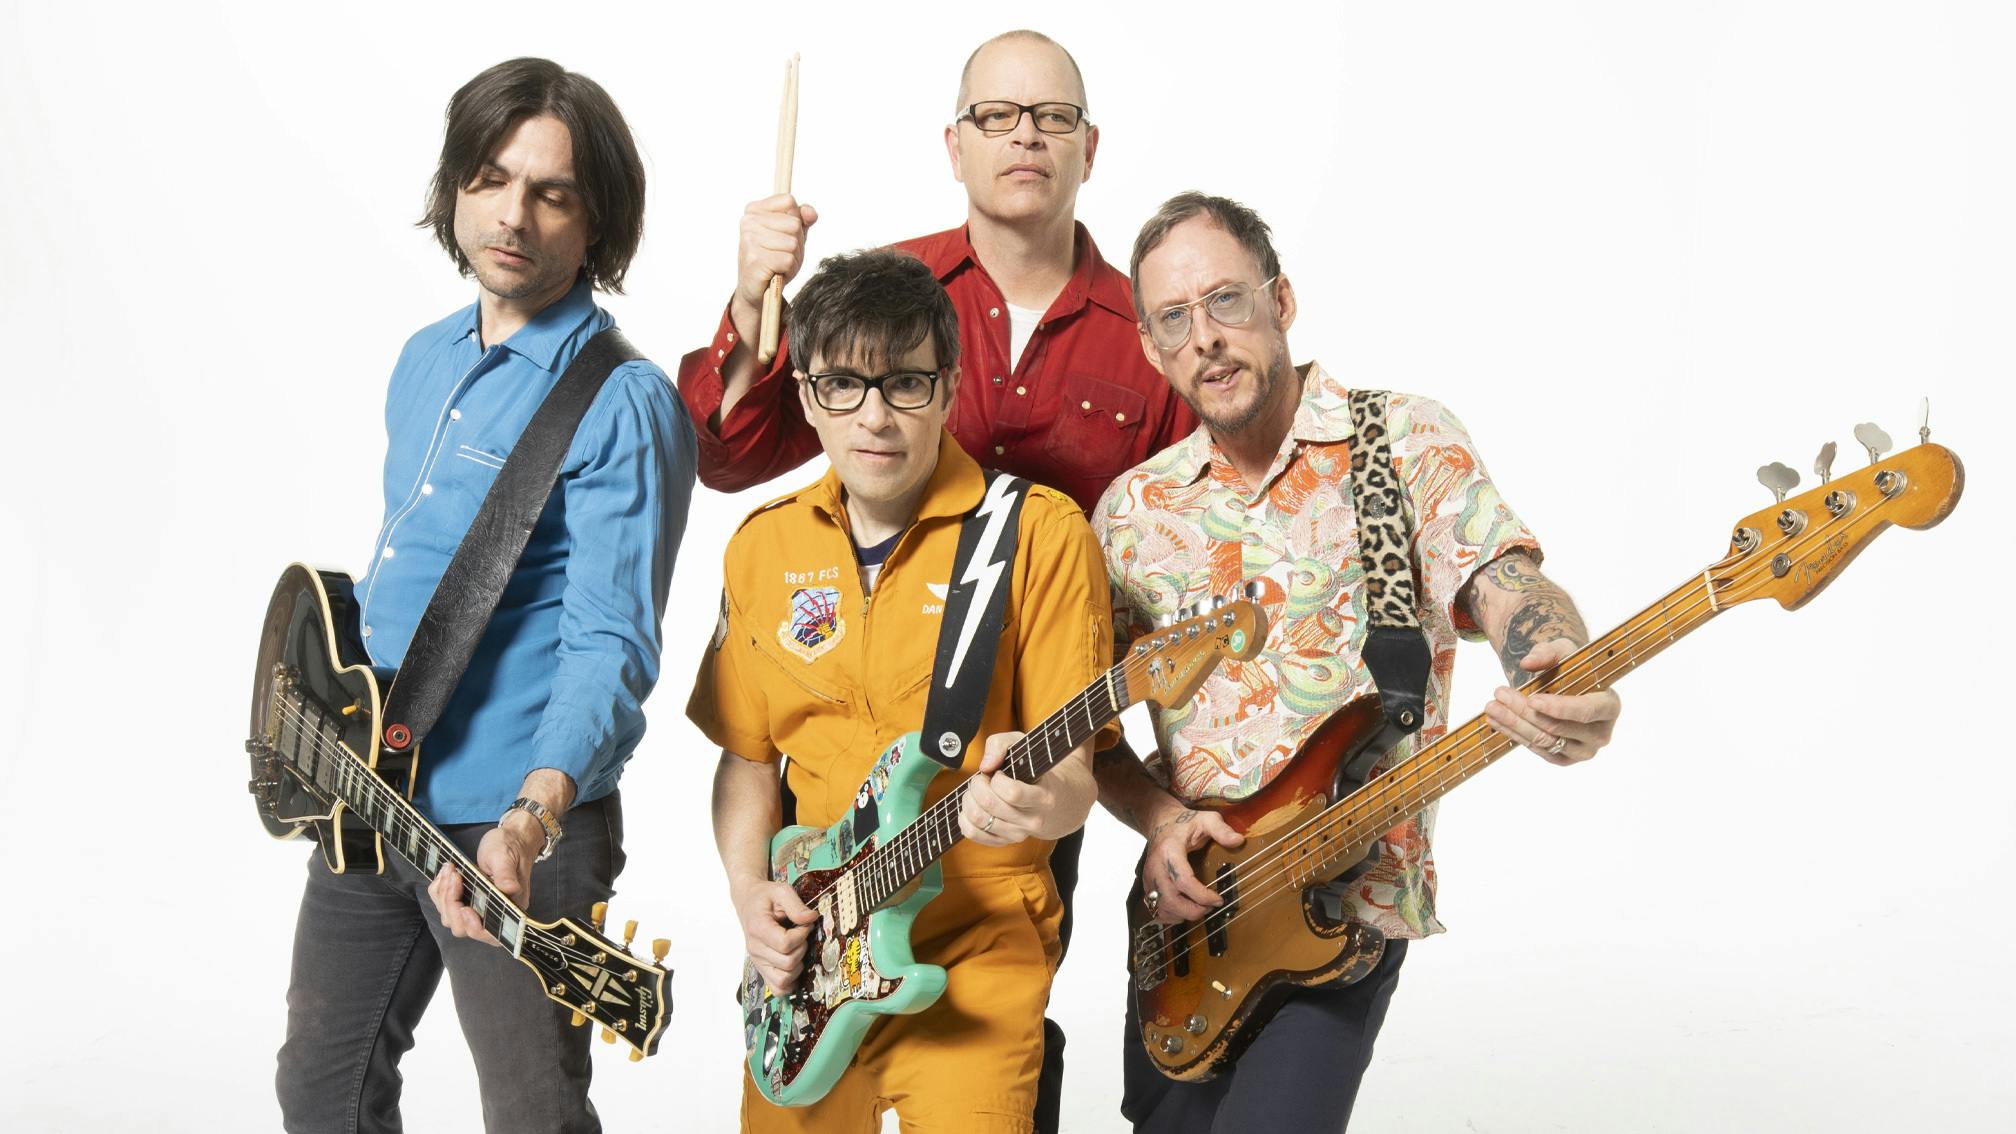 This is Weezer's setlist from the Hella Mega Tour